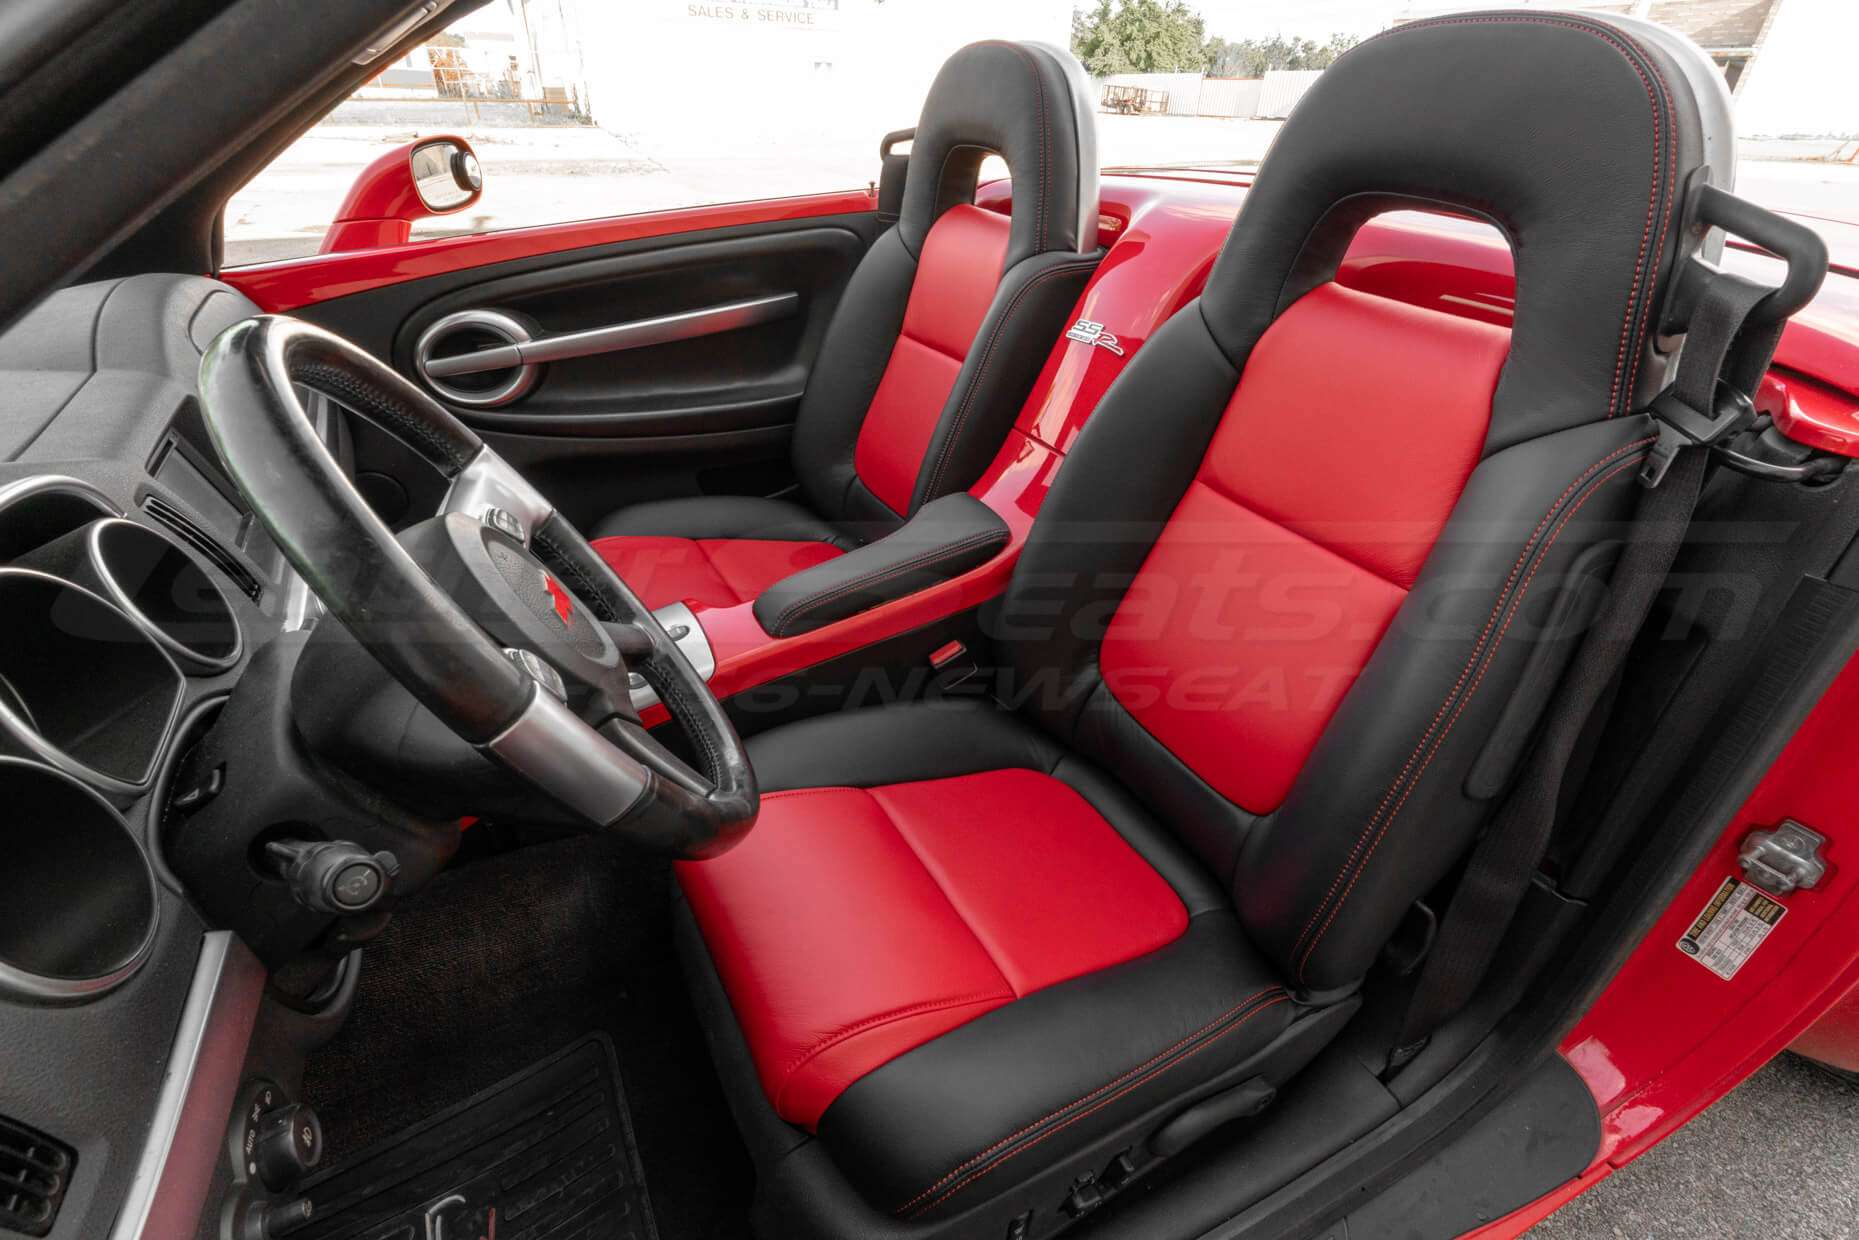 Alternate view of front driver seat with LeatherSeats.com upholstery kit installed